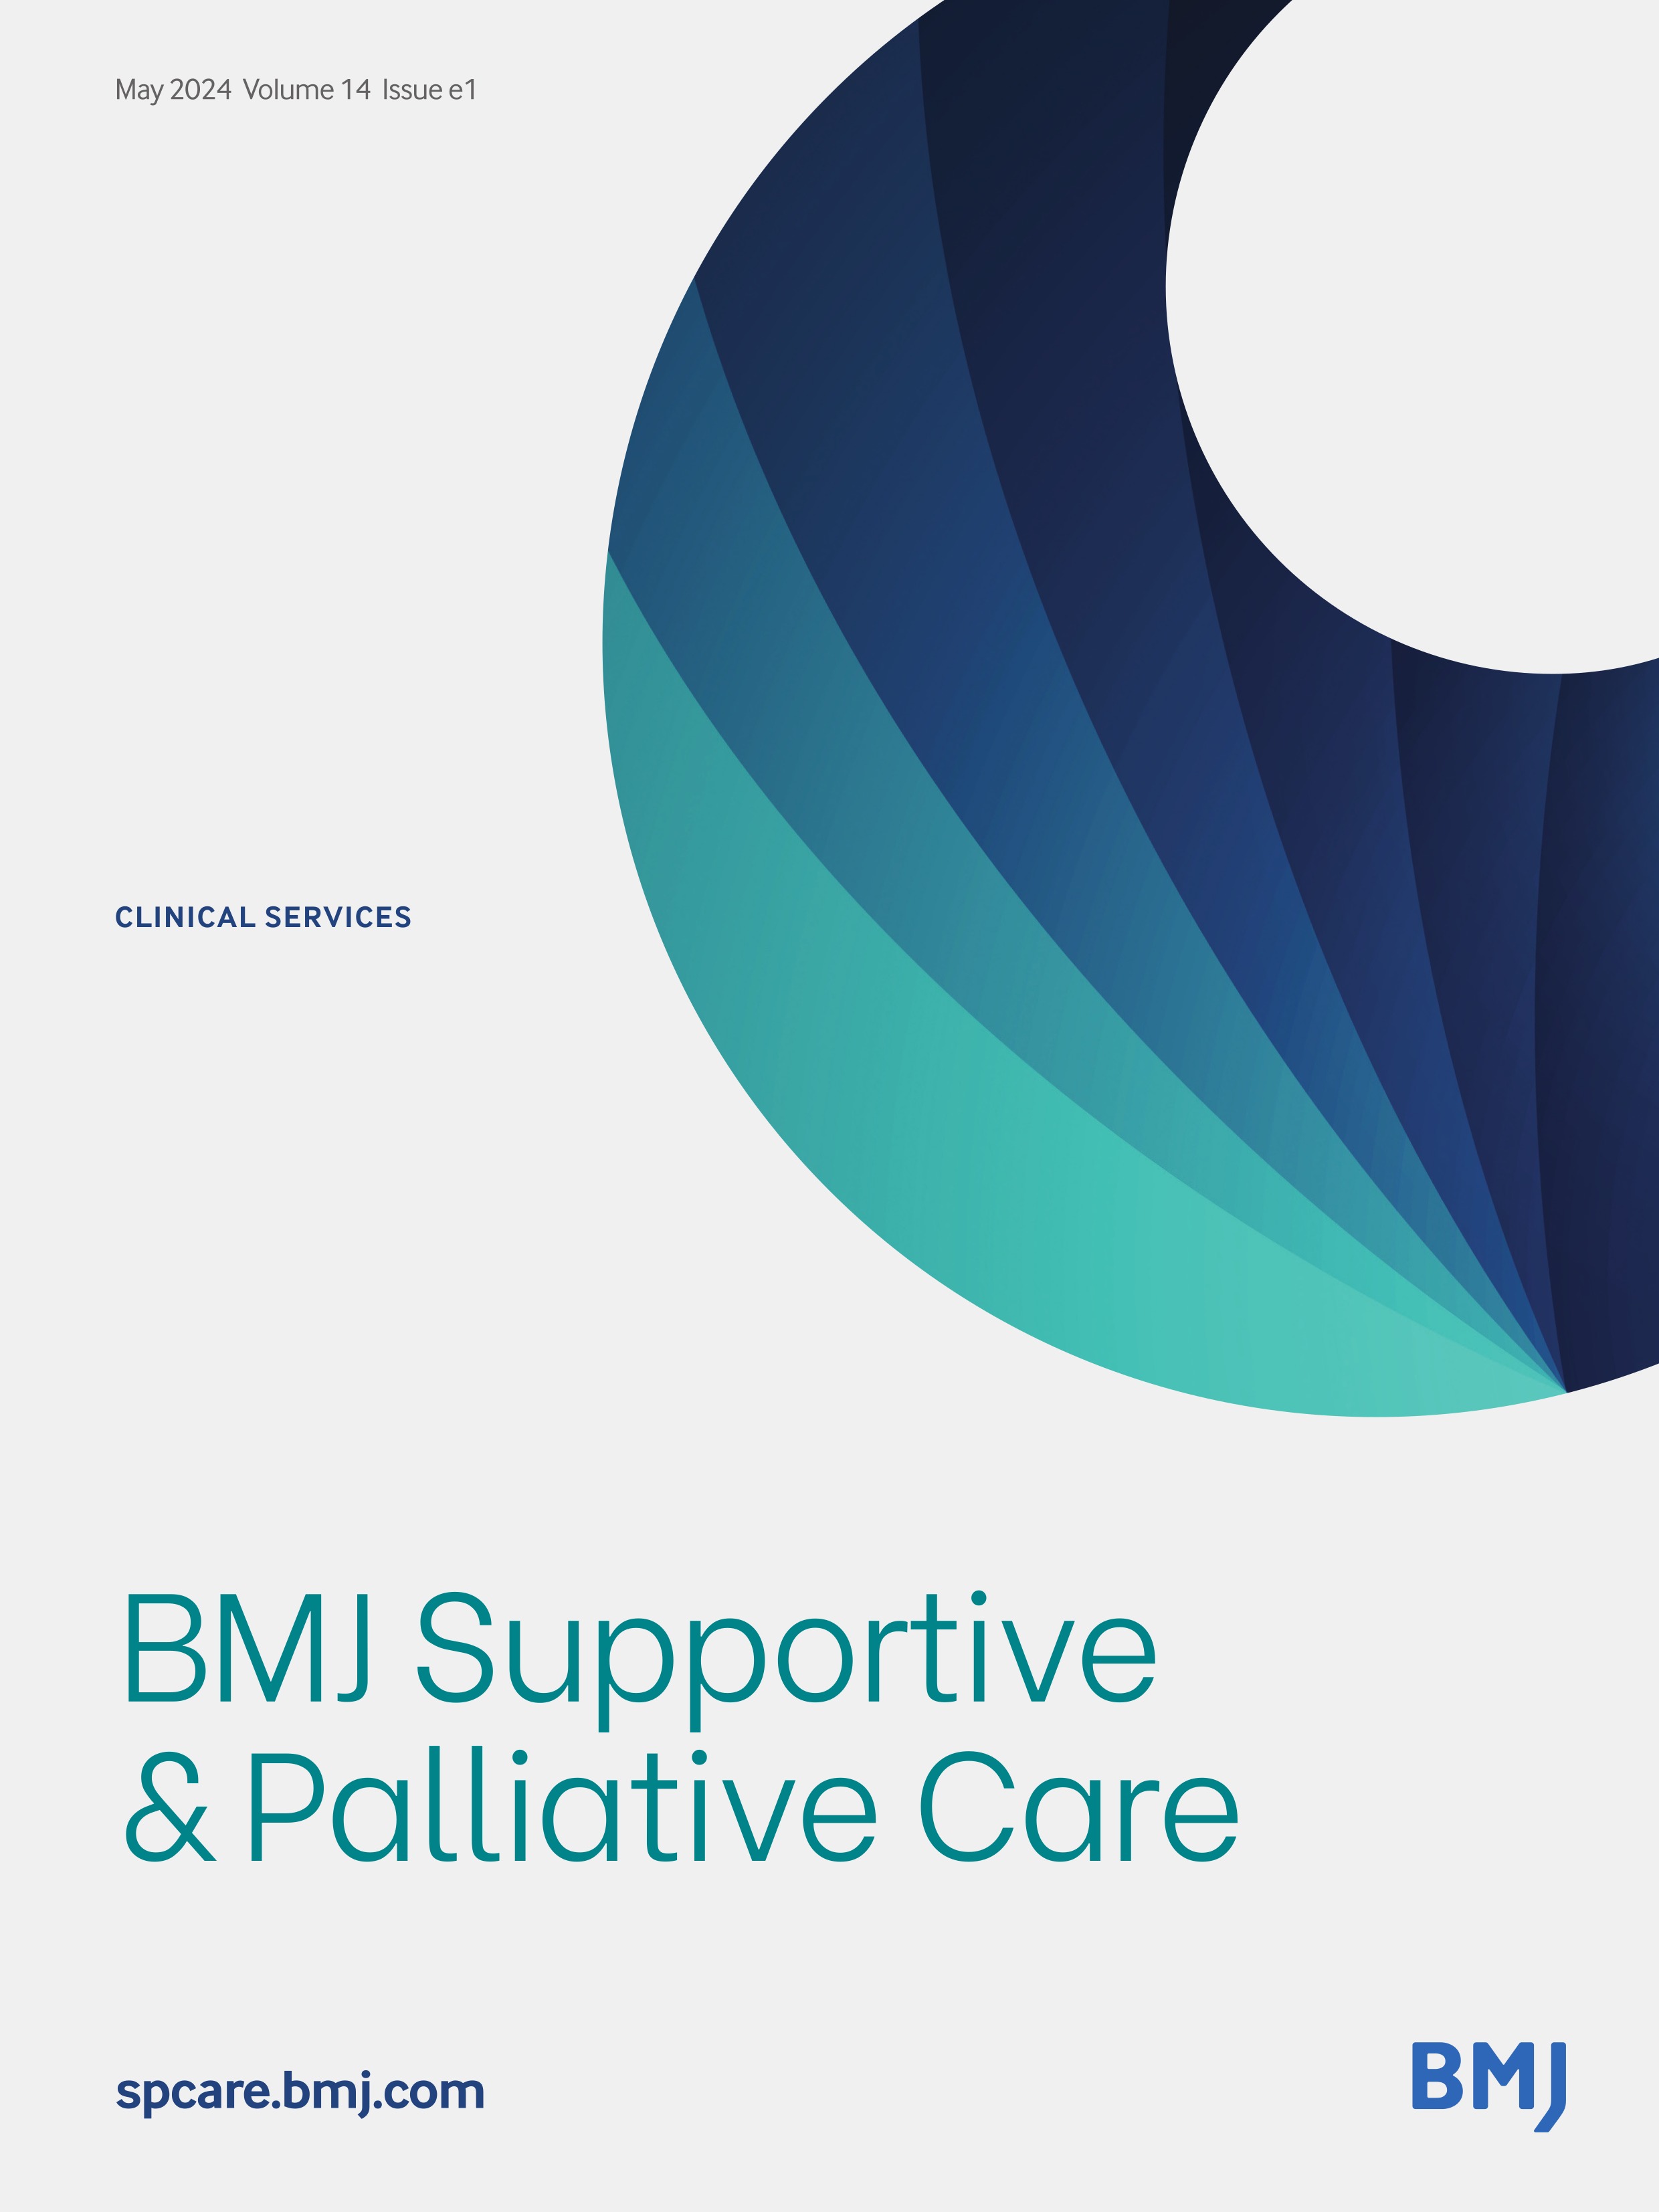 Specialist palliative care services response to ethnic minority groups with COVID-19: equal but inequitable--an observational study